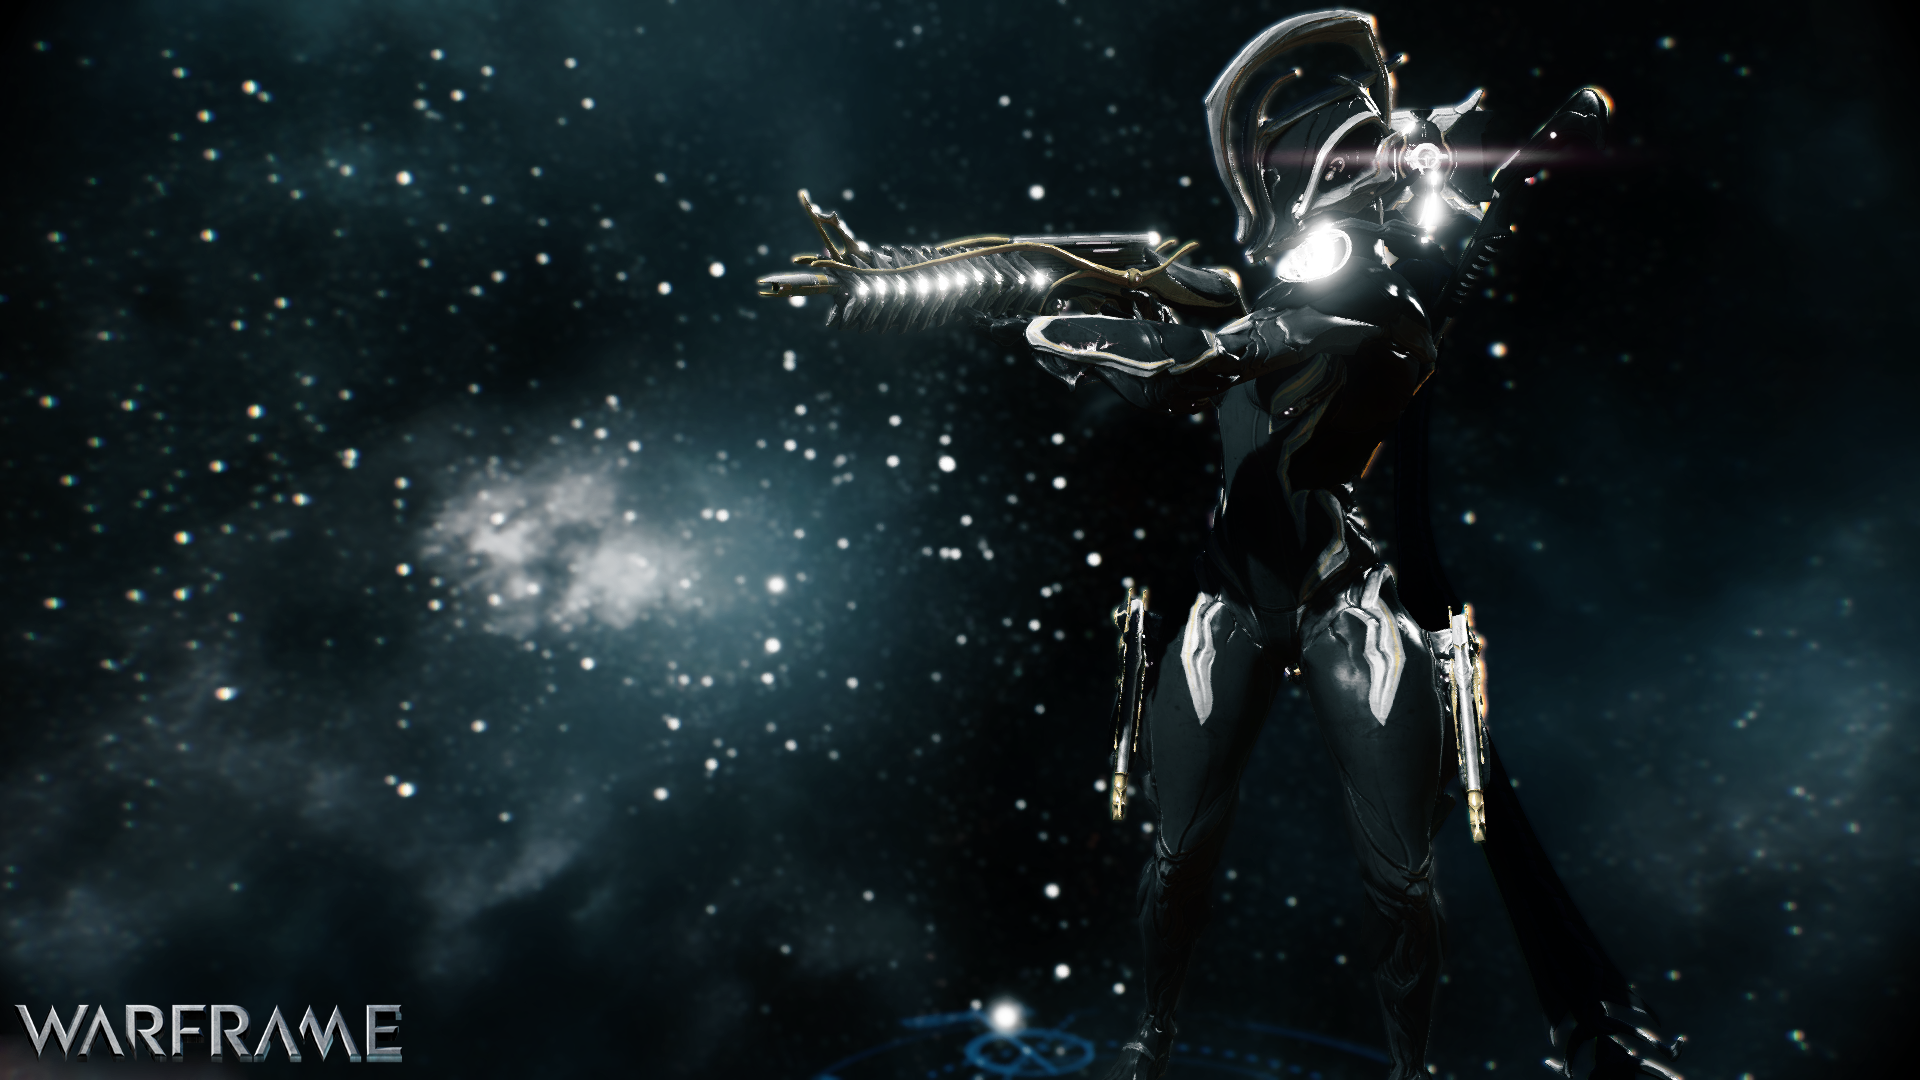 warframe___nyx_by_r9xchaos-d6wp7ik.png